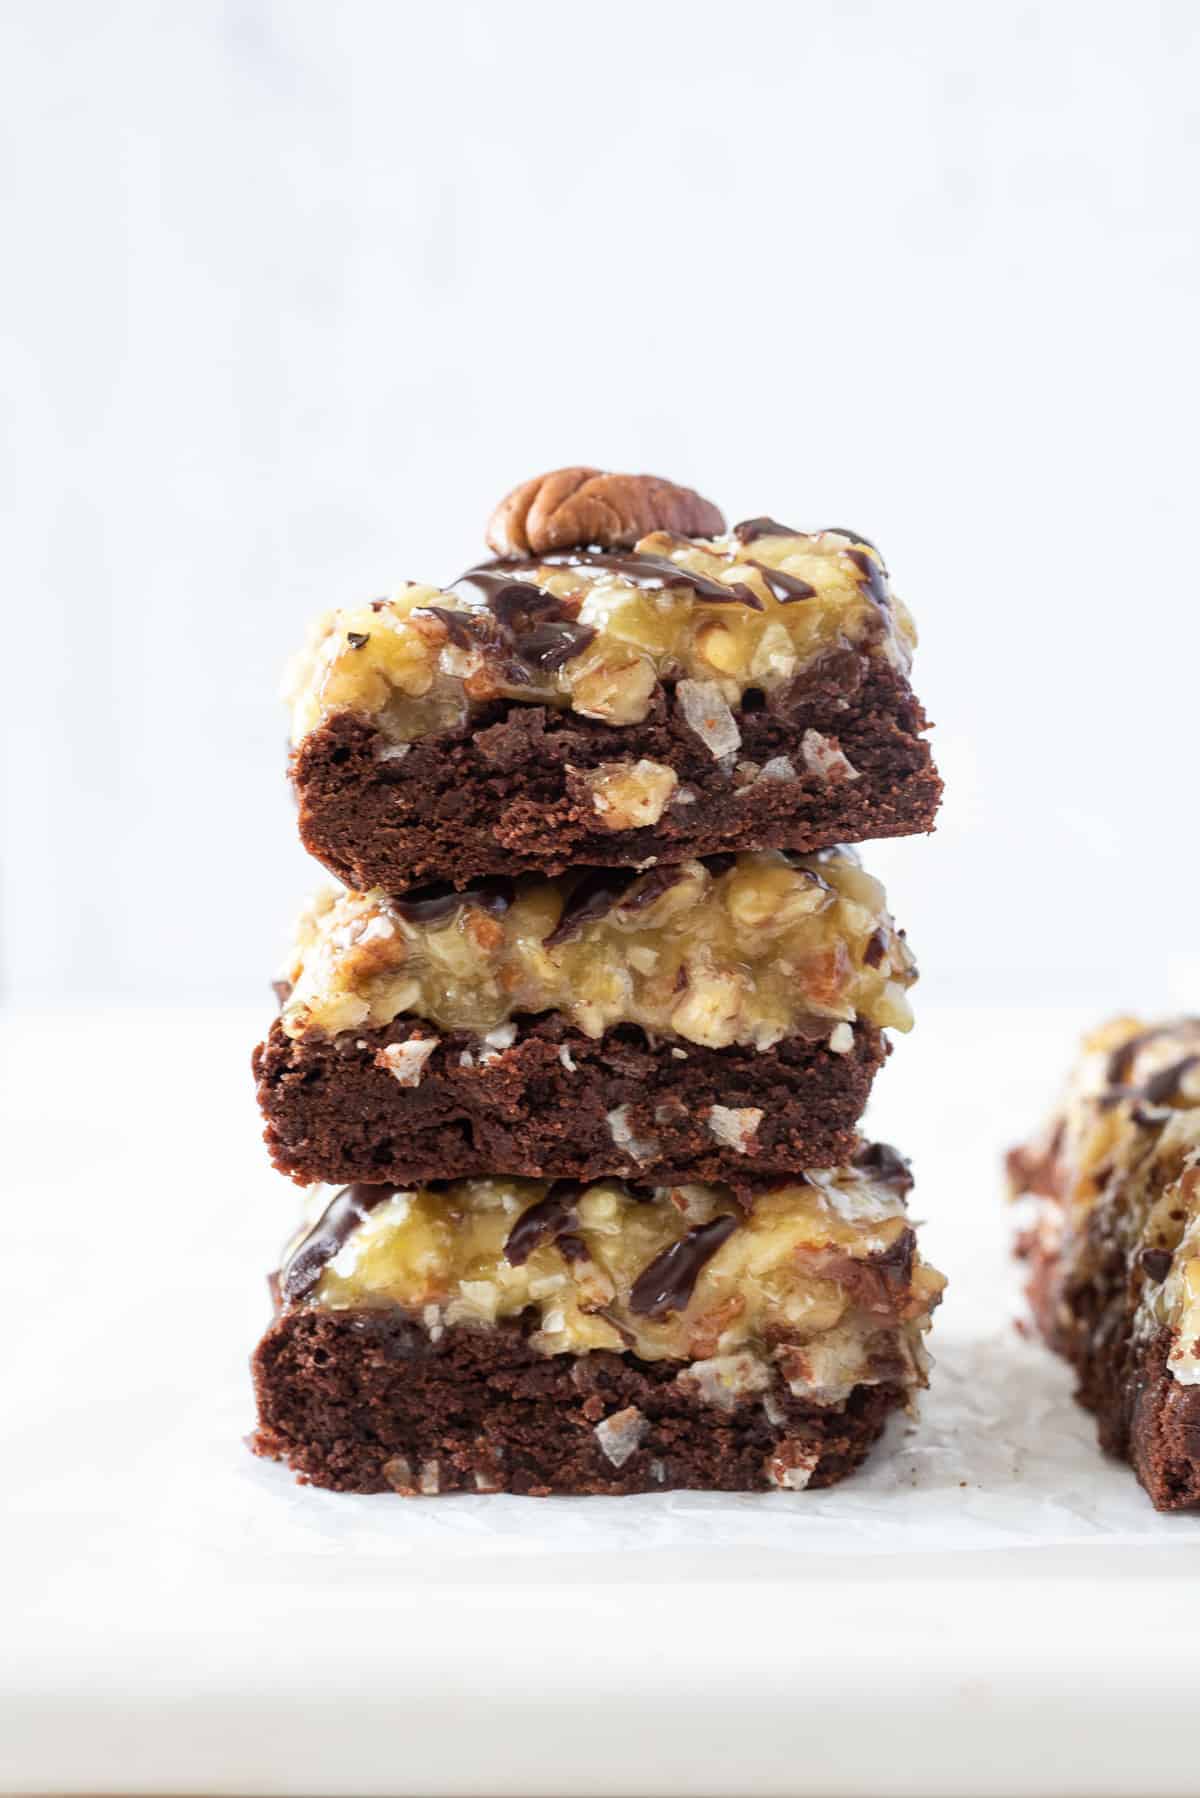 A close up side view of a stack of German chocolate brownies on a white counter.